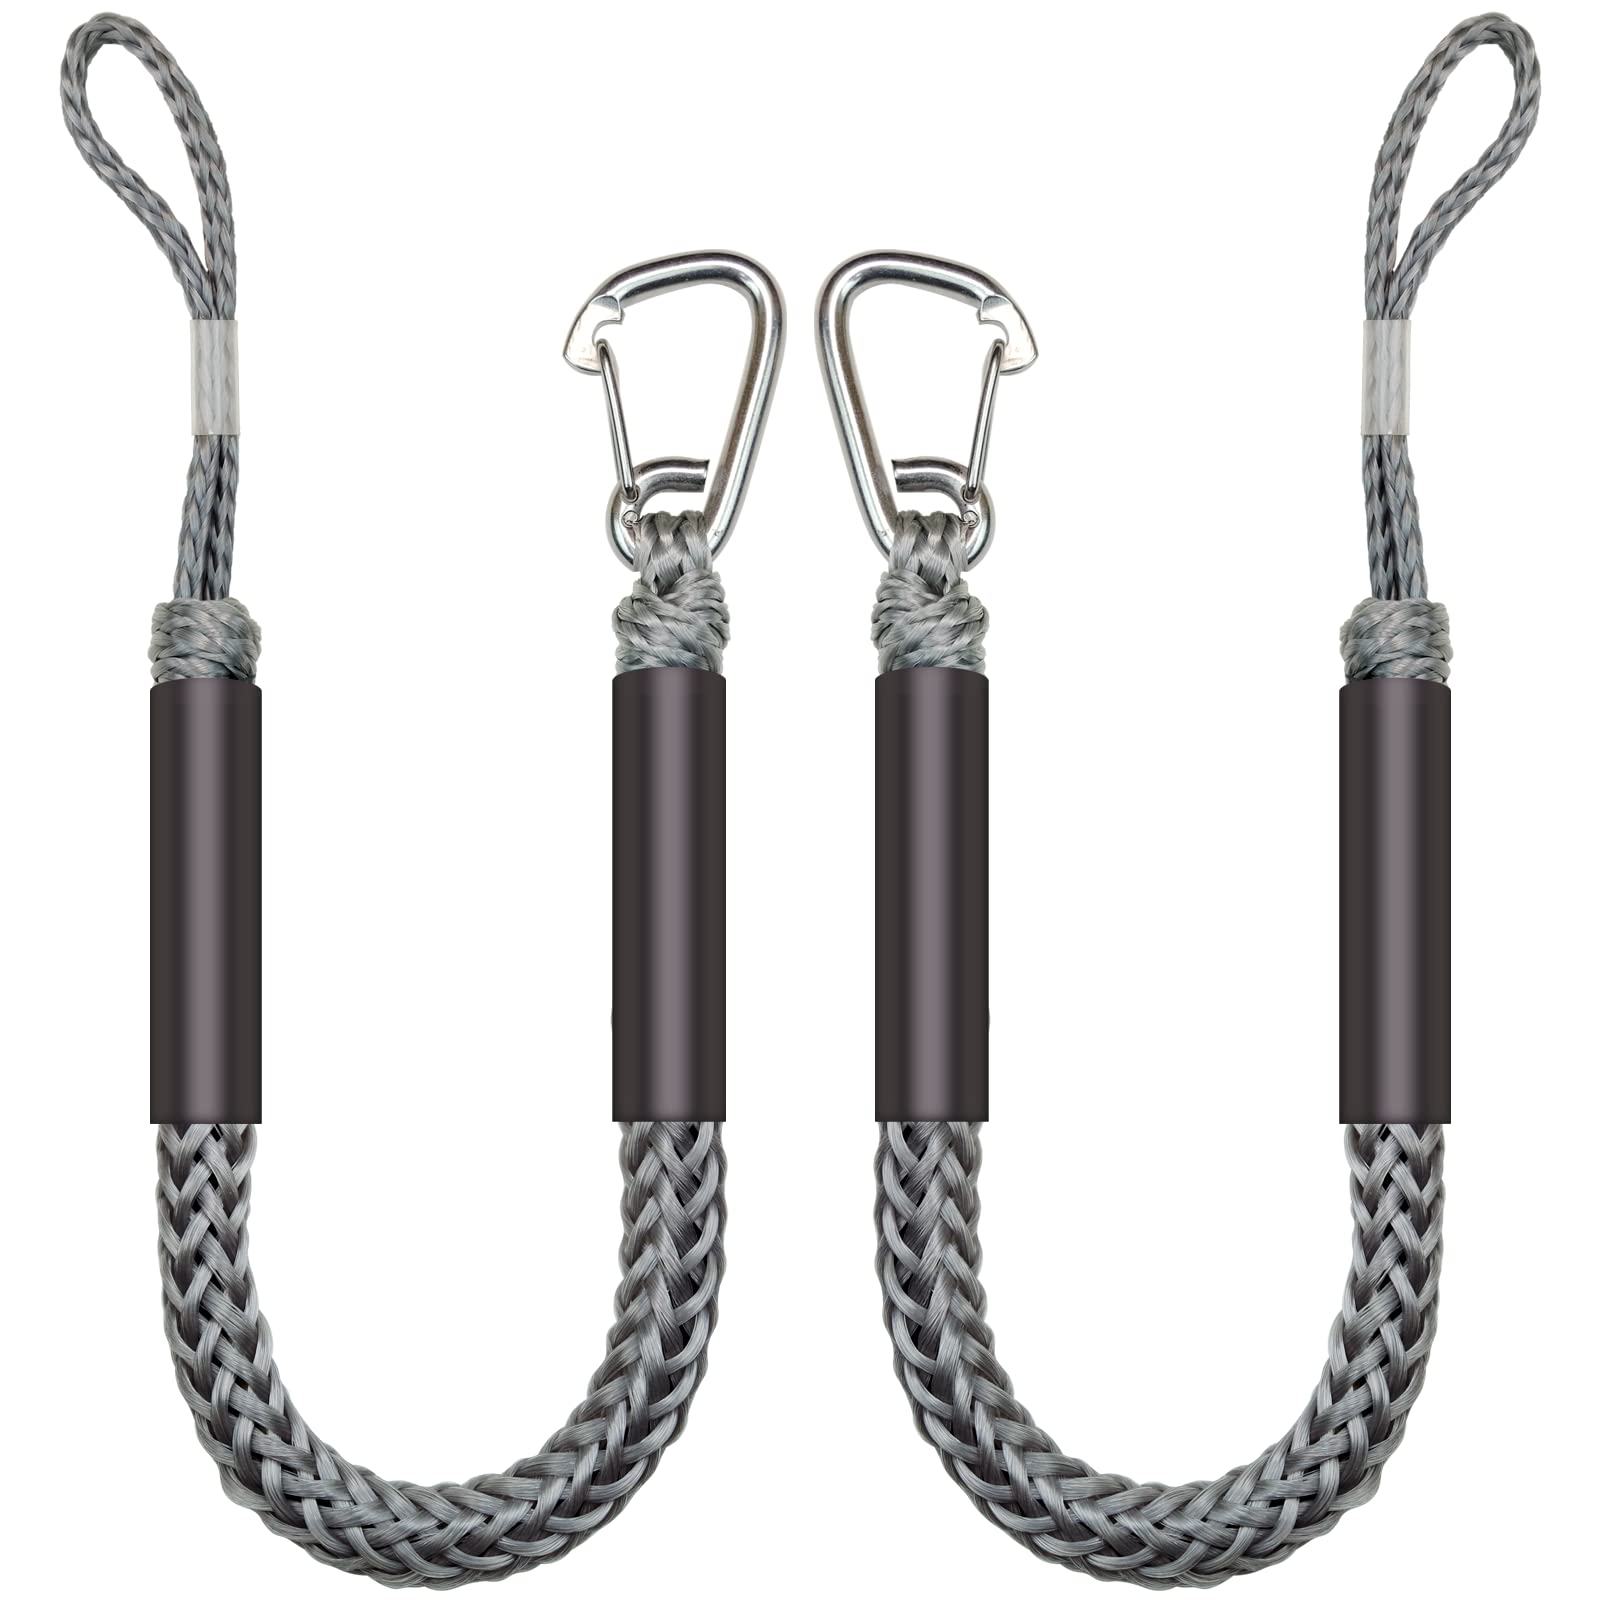 ONOSHIP 316 Stainless Clip 3FT Boat Bungee Dock Lines 2PCS Boat